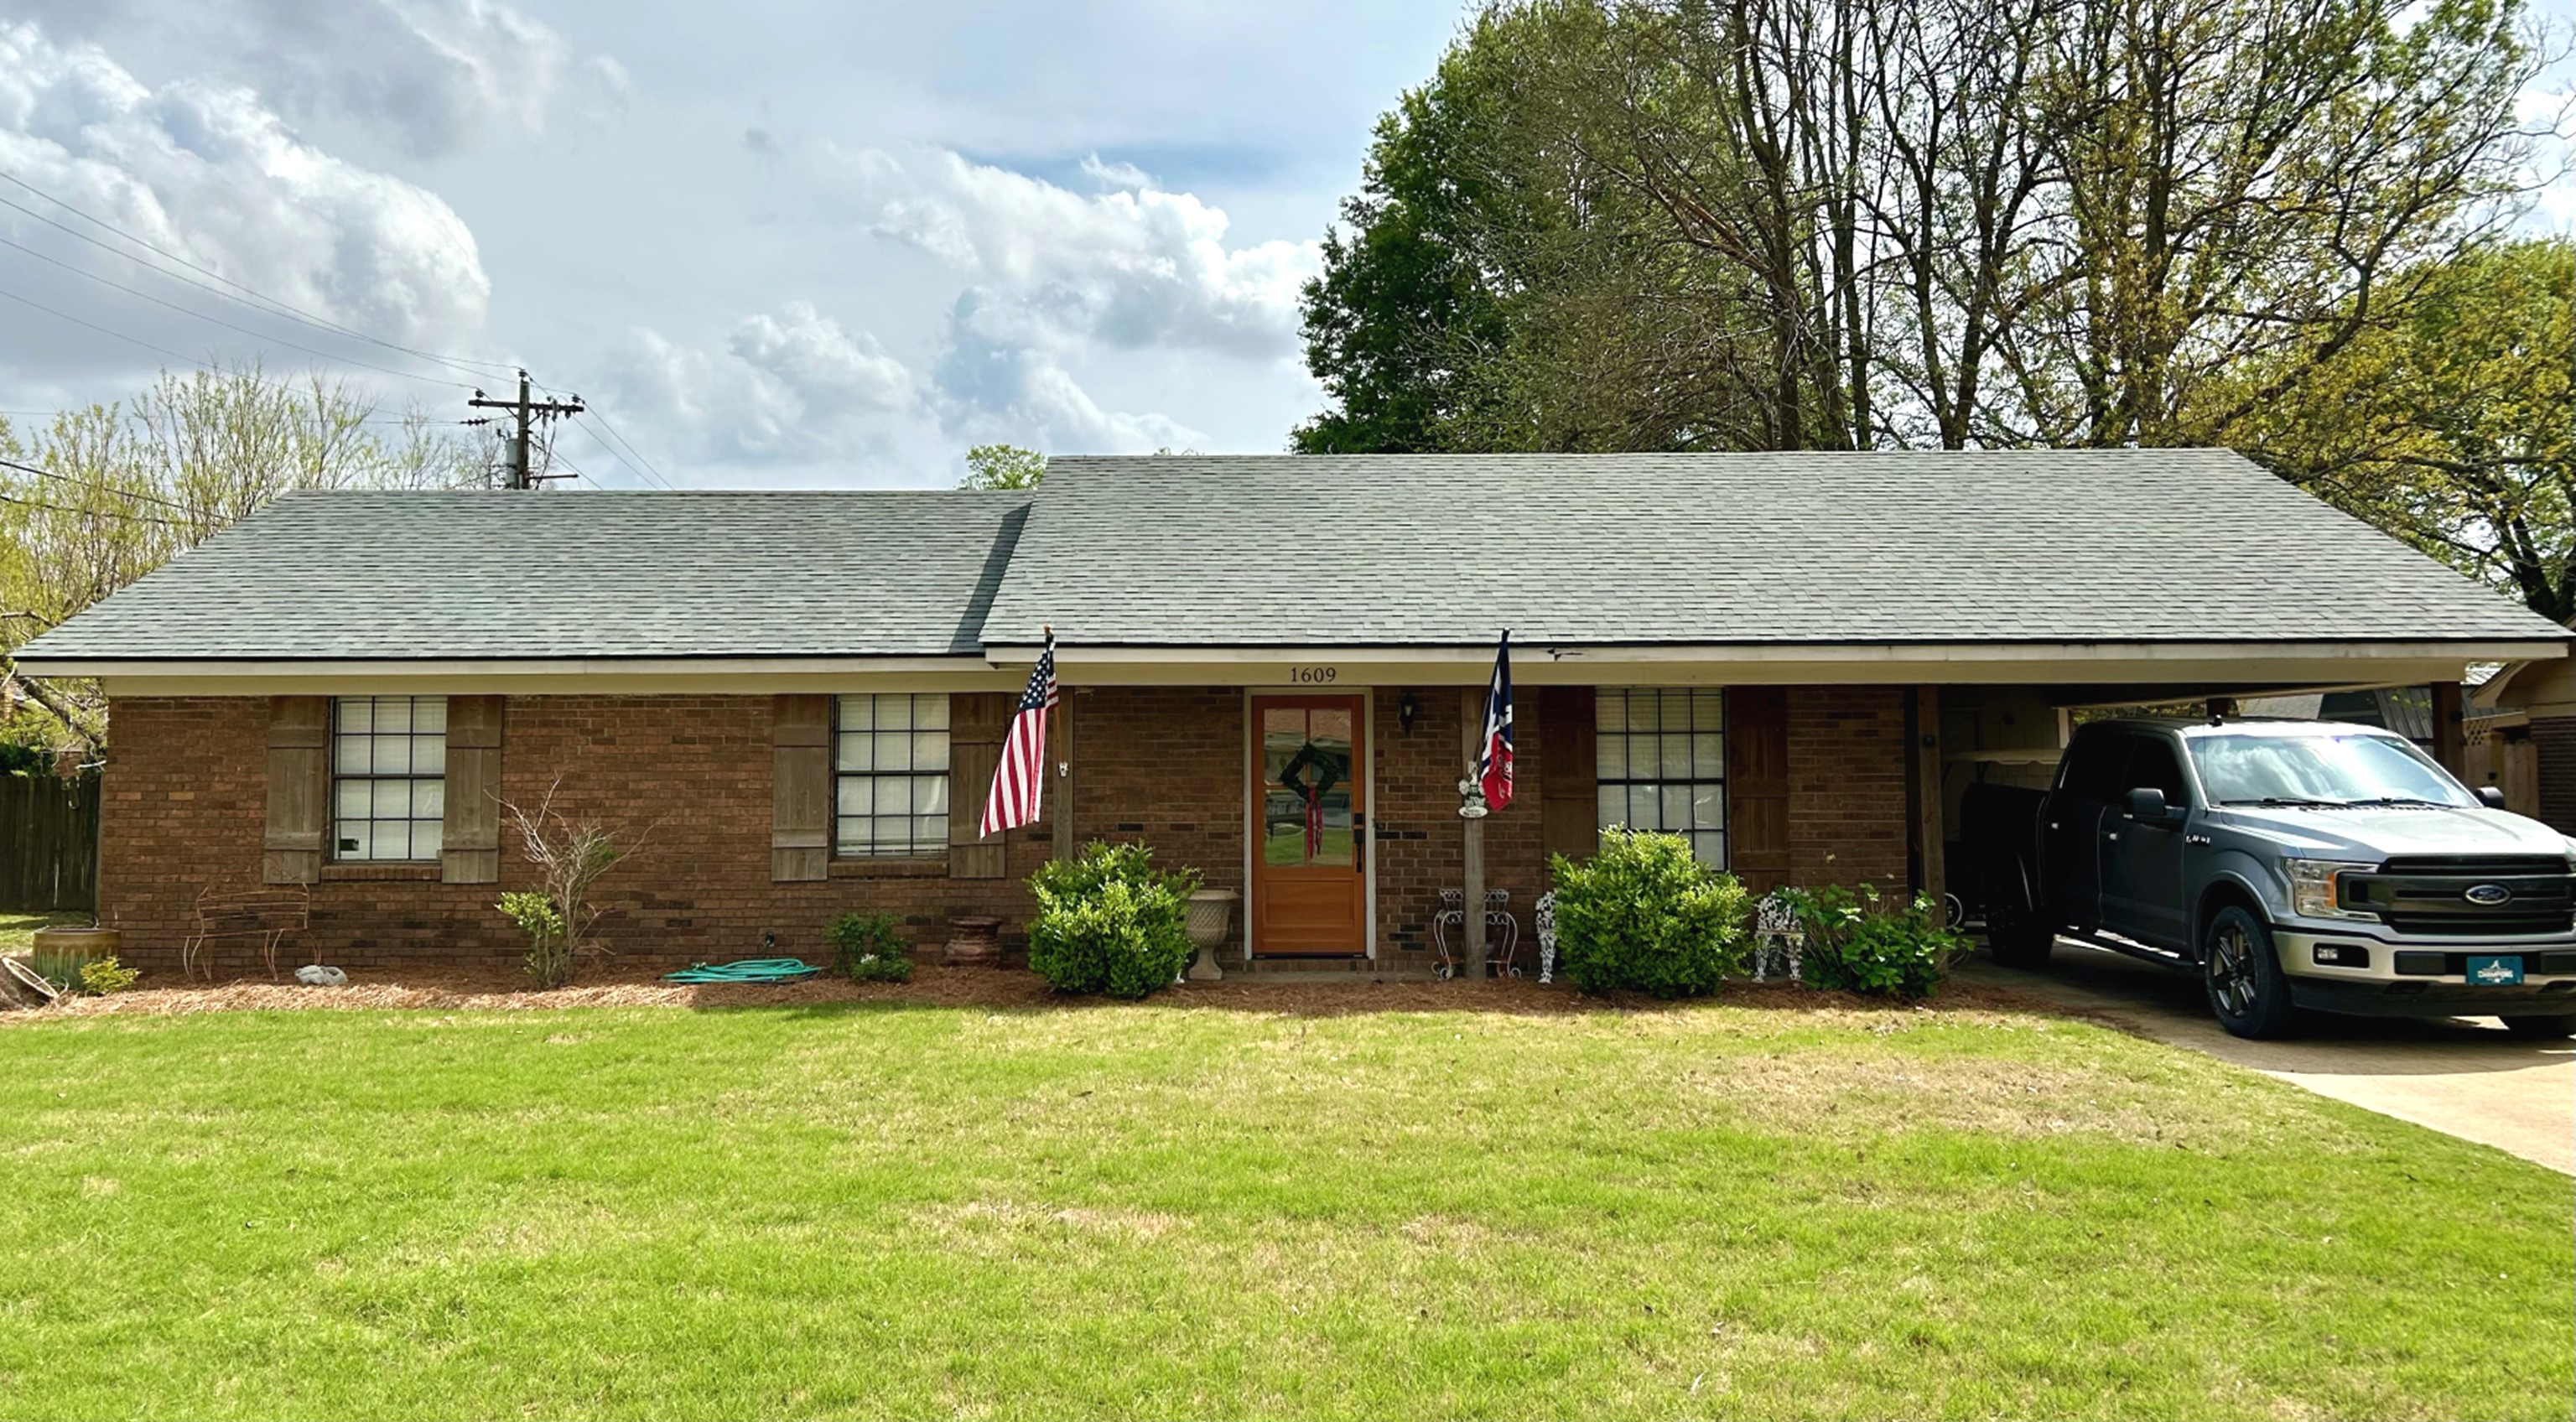 Home in Bolivar County at 1609 College Street in Cleveland, MS